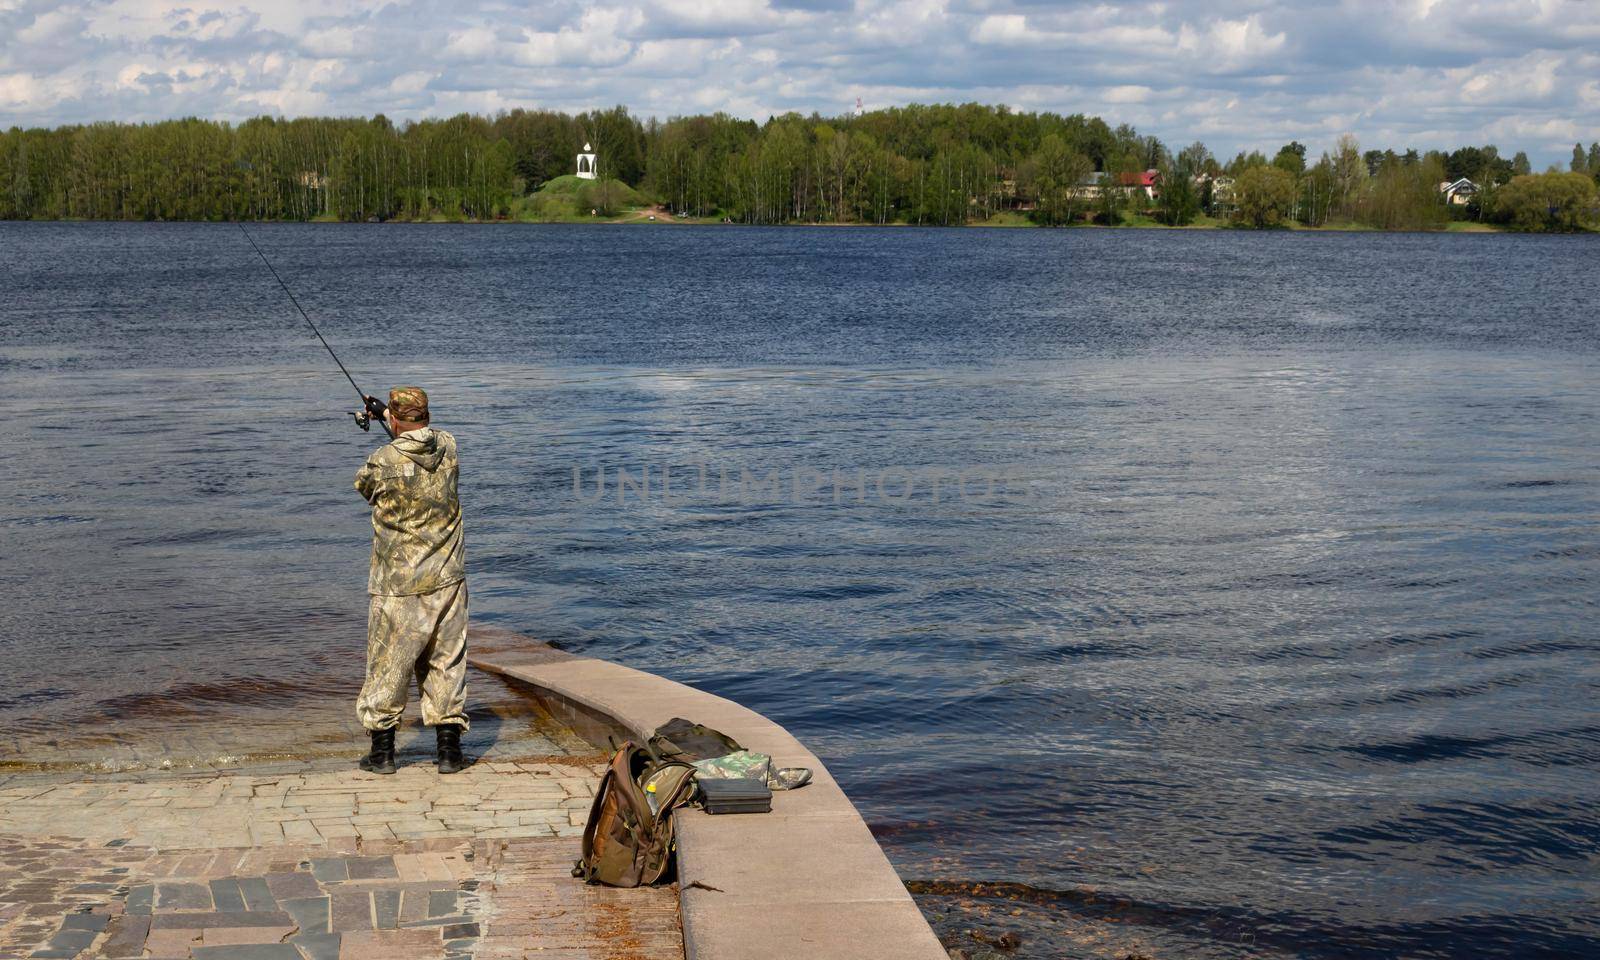 A fisherman in camouflage catches fish in the spring river by lapushka62